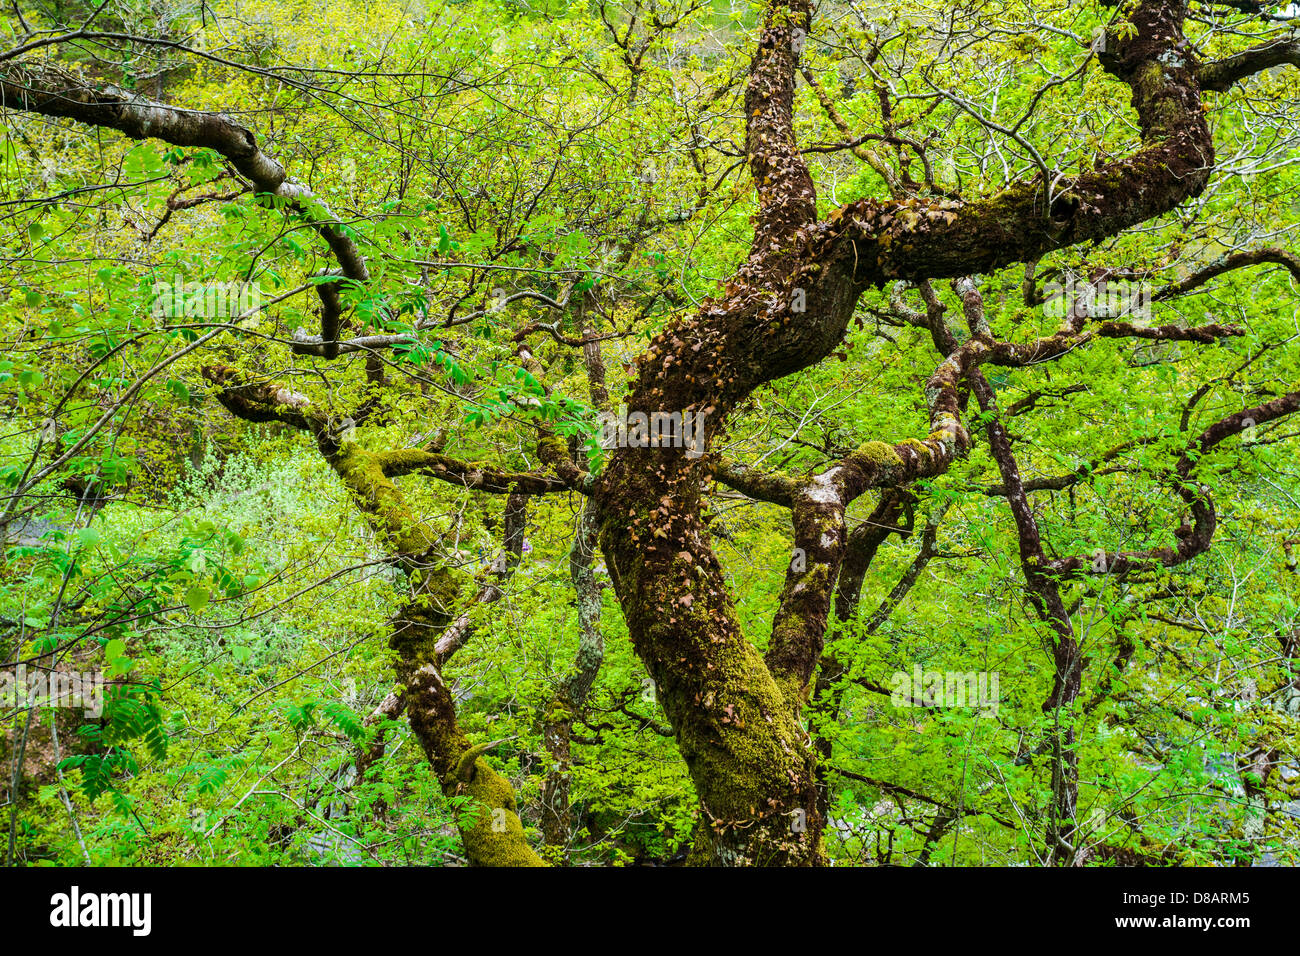 Sessile Oak in Myrtleberry Wood in Exmoor National Park near Lynmouth, Devon, England. Stock Photo